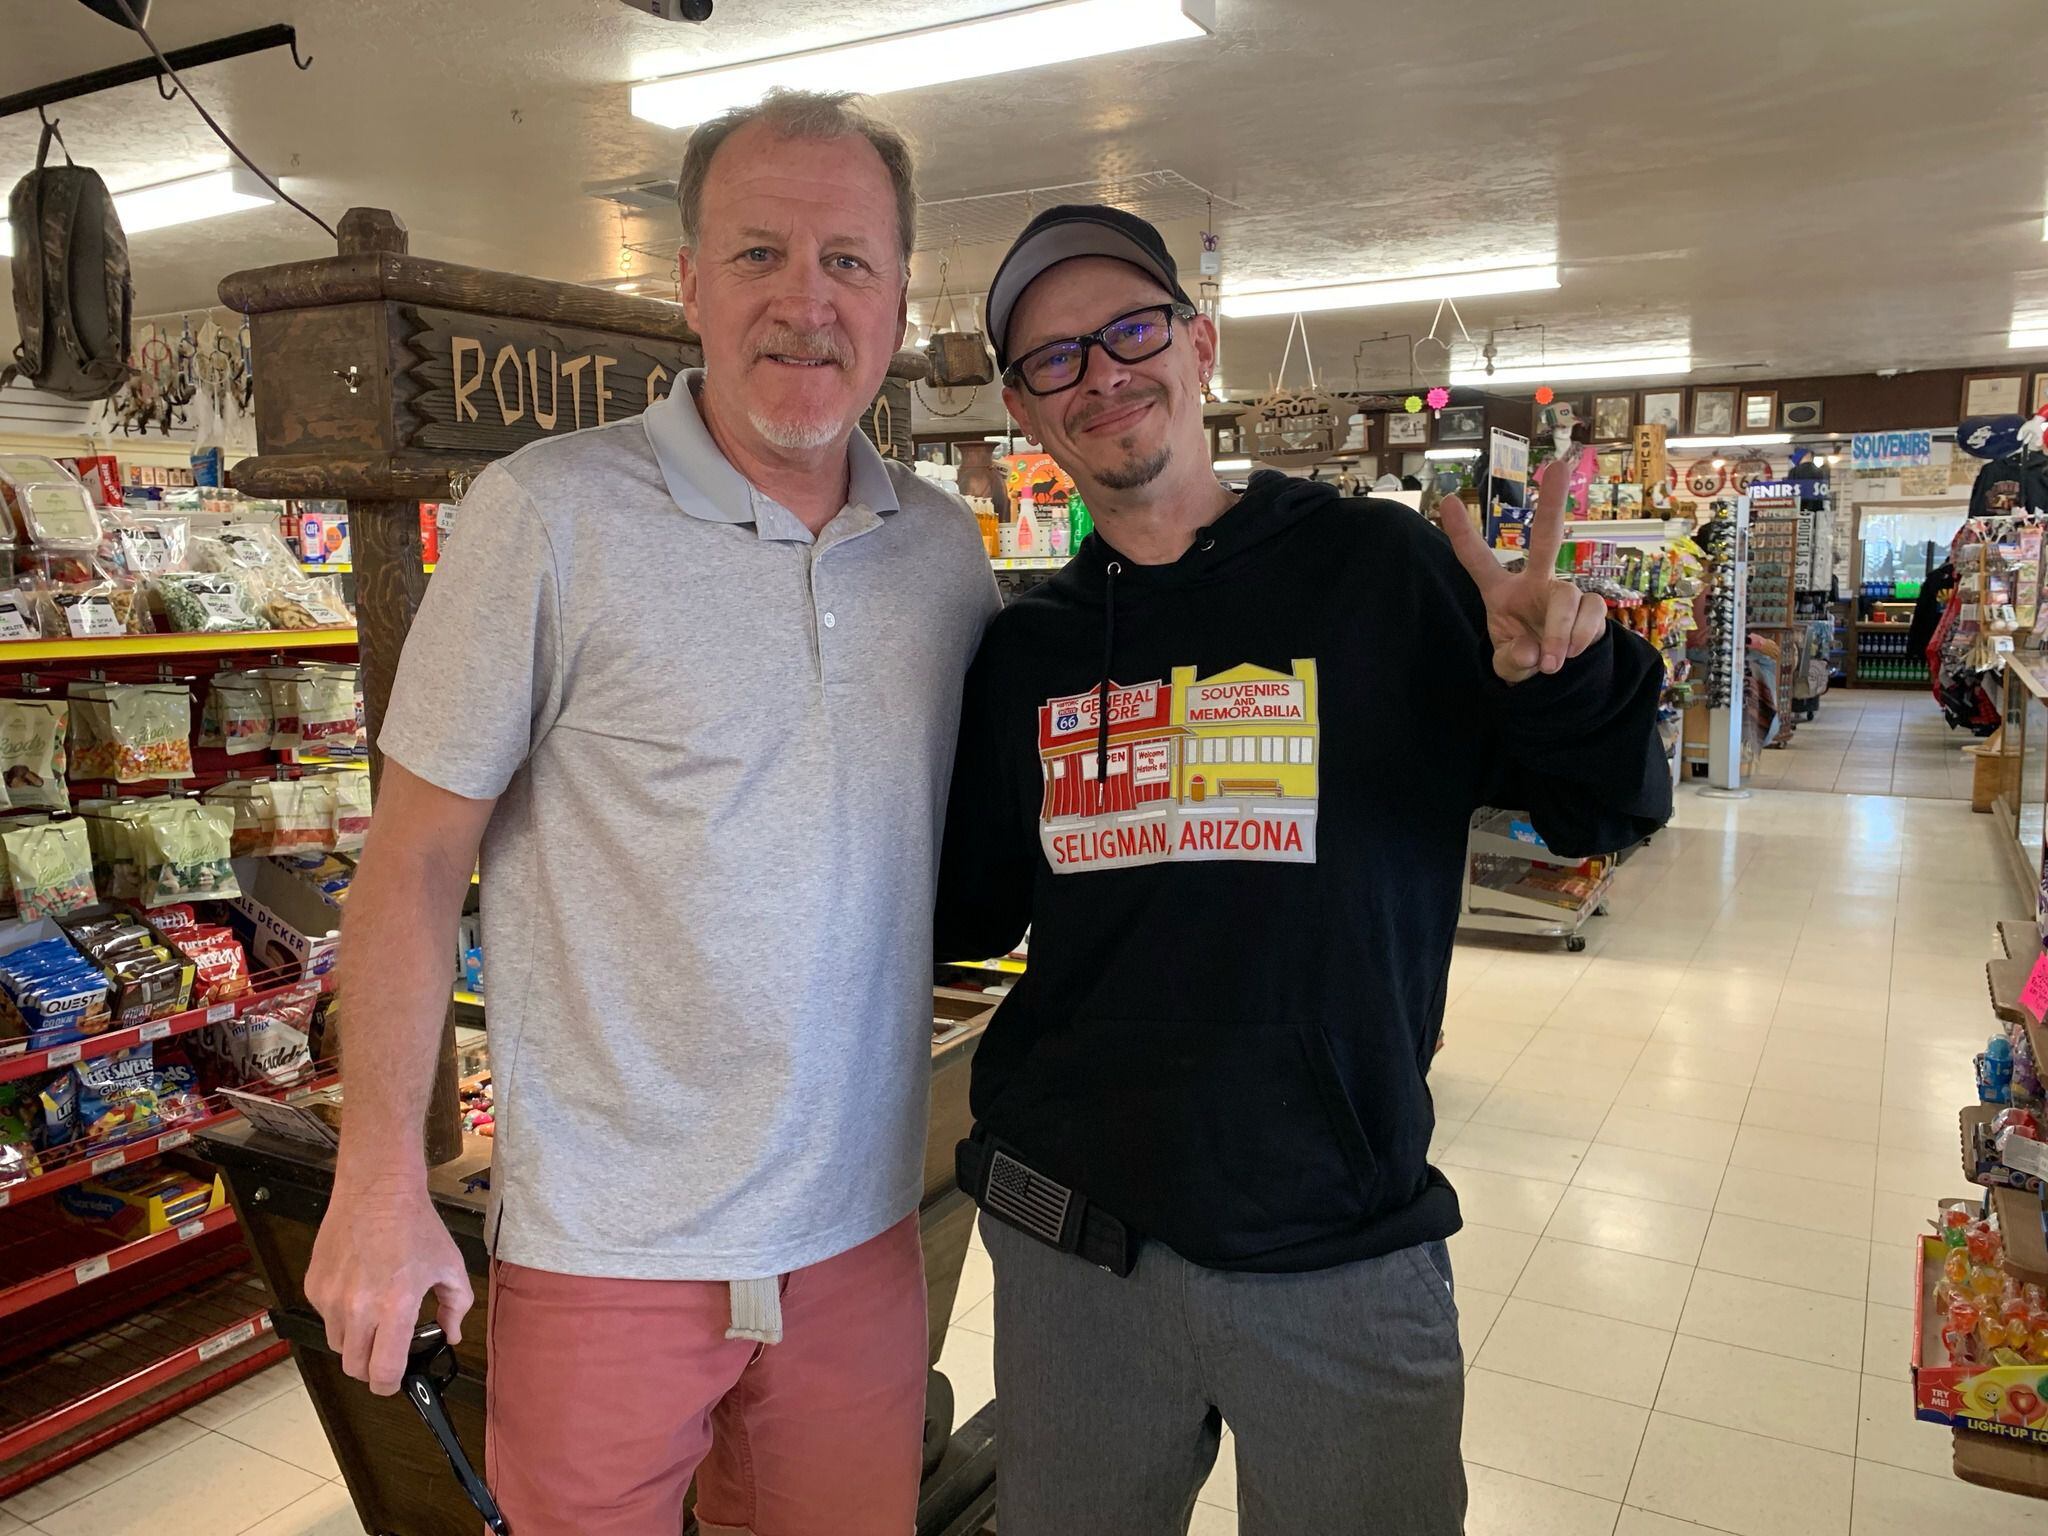 Scott visits the Route 66 General Store in Seligman, AZ